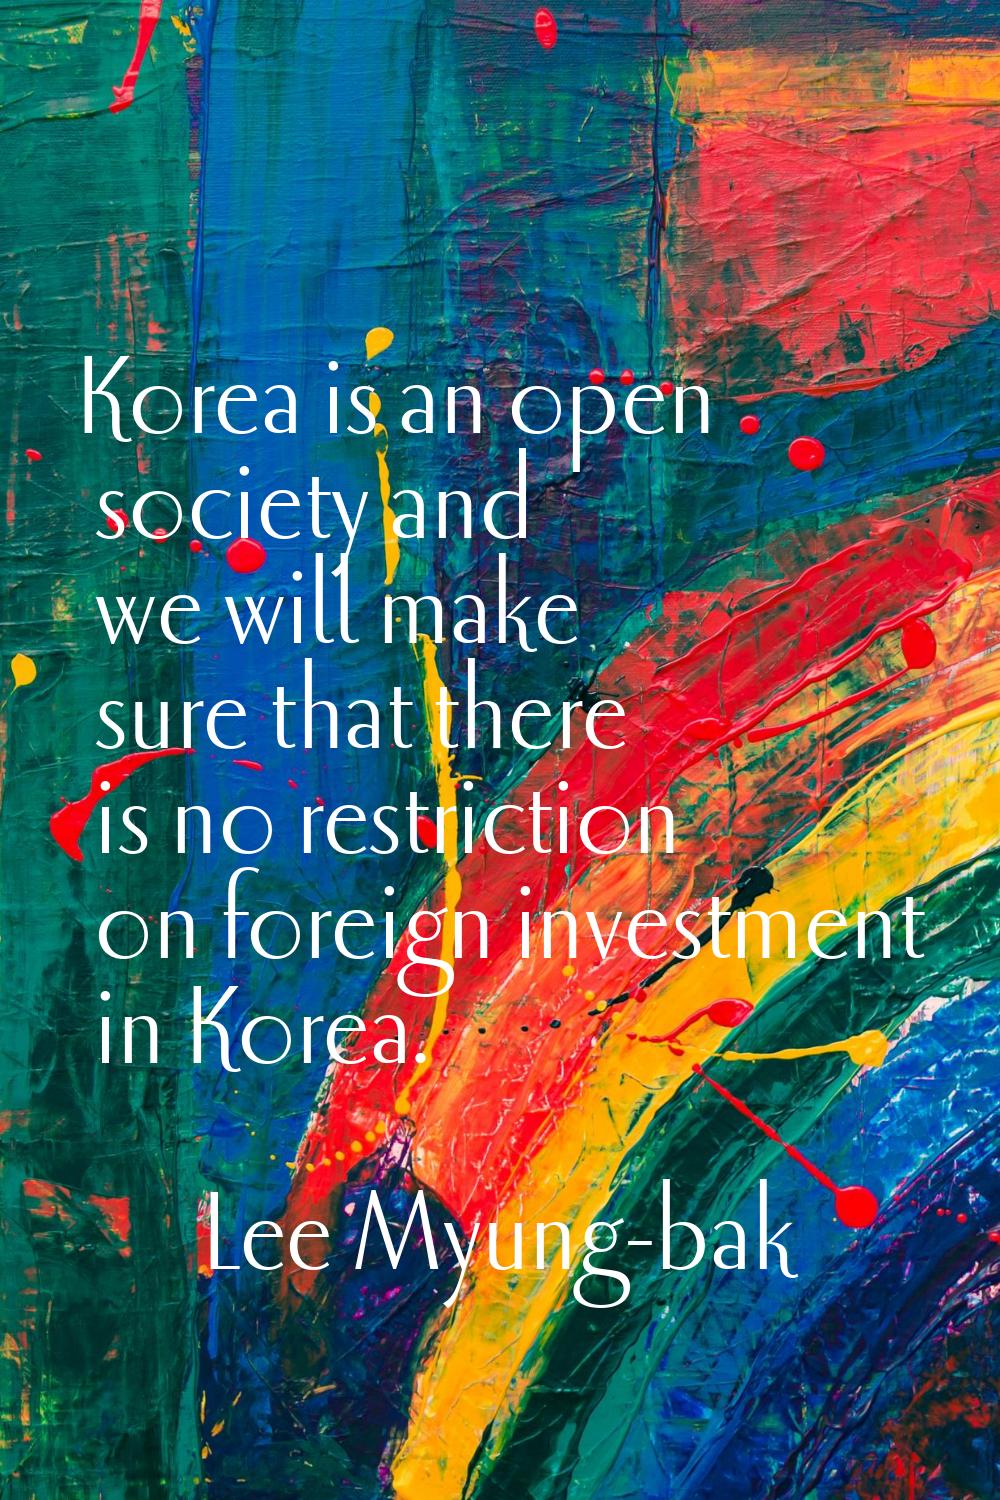 Korea is an open society and we will make sure that there is no restriction on foreign investment i